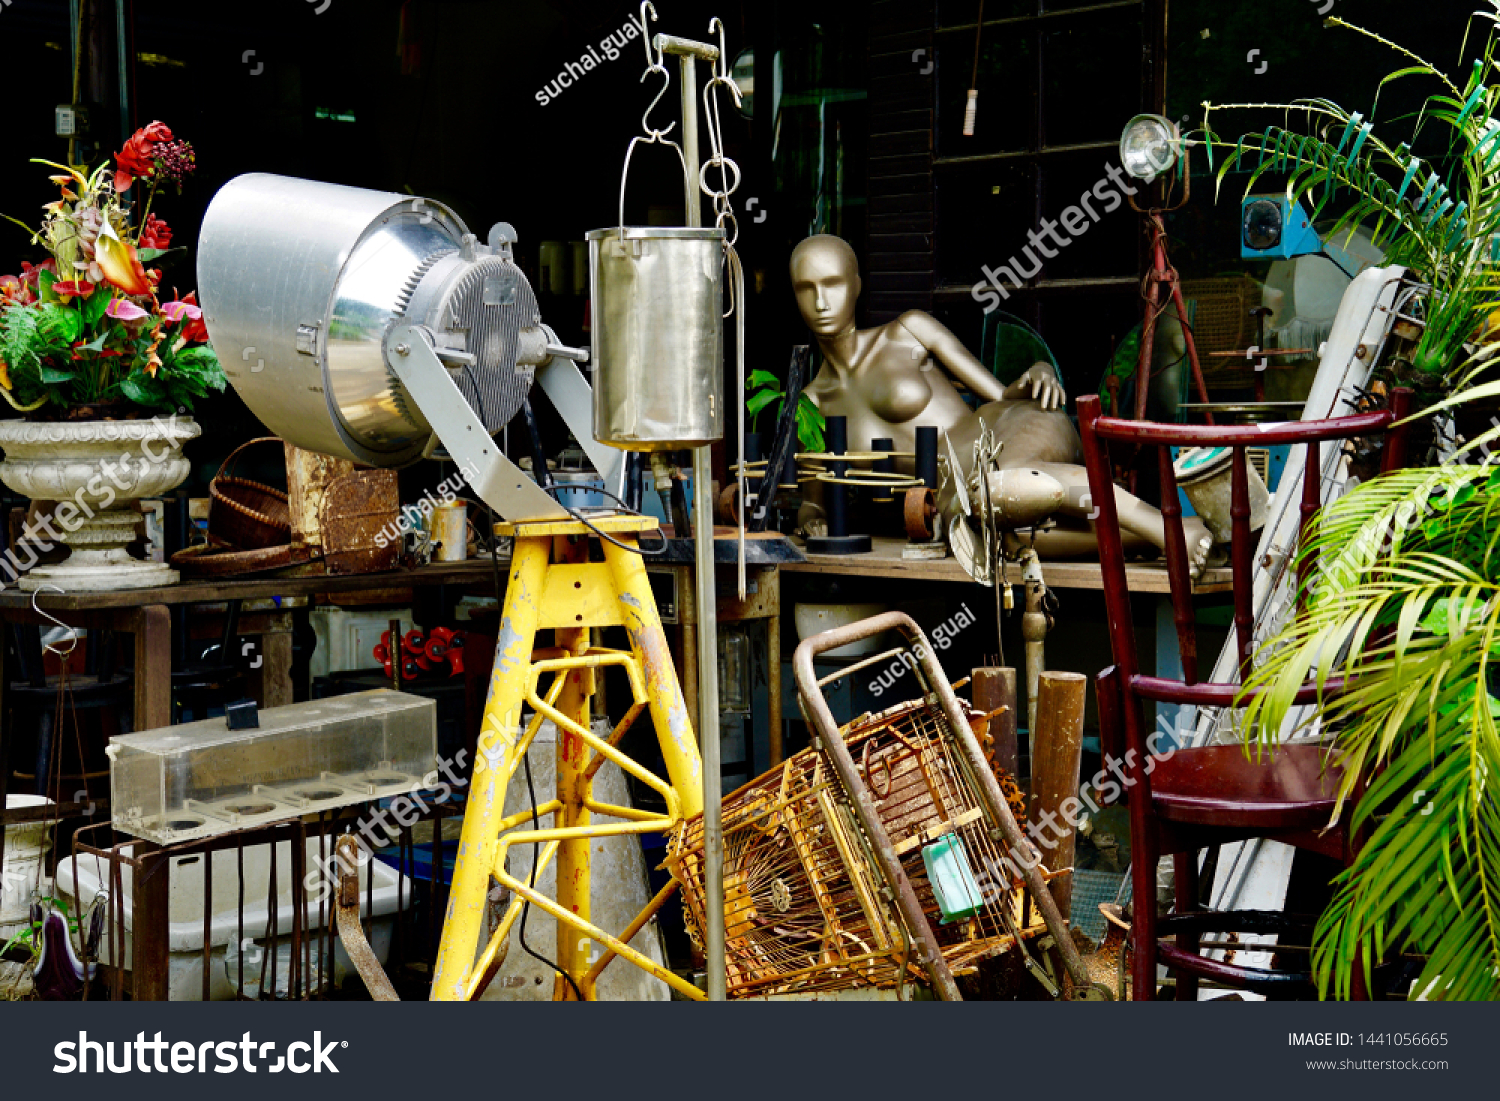 Scrap equipment. Old Equipment and tools for modeling. Materials, equipment and tools from the trade show, exhibitions and fasion event. Second hand shops and used goods are located along the road. #1441056665